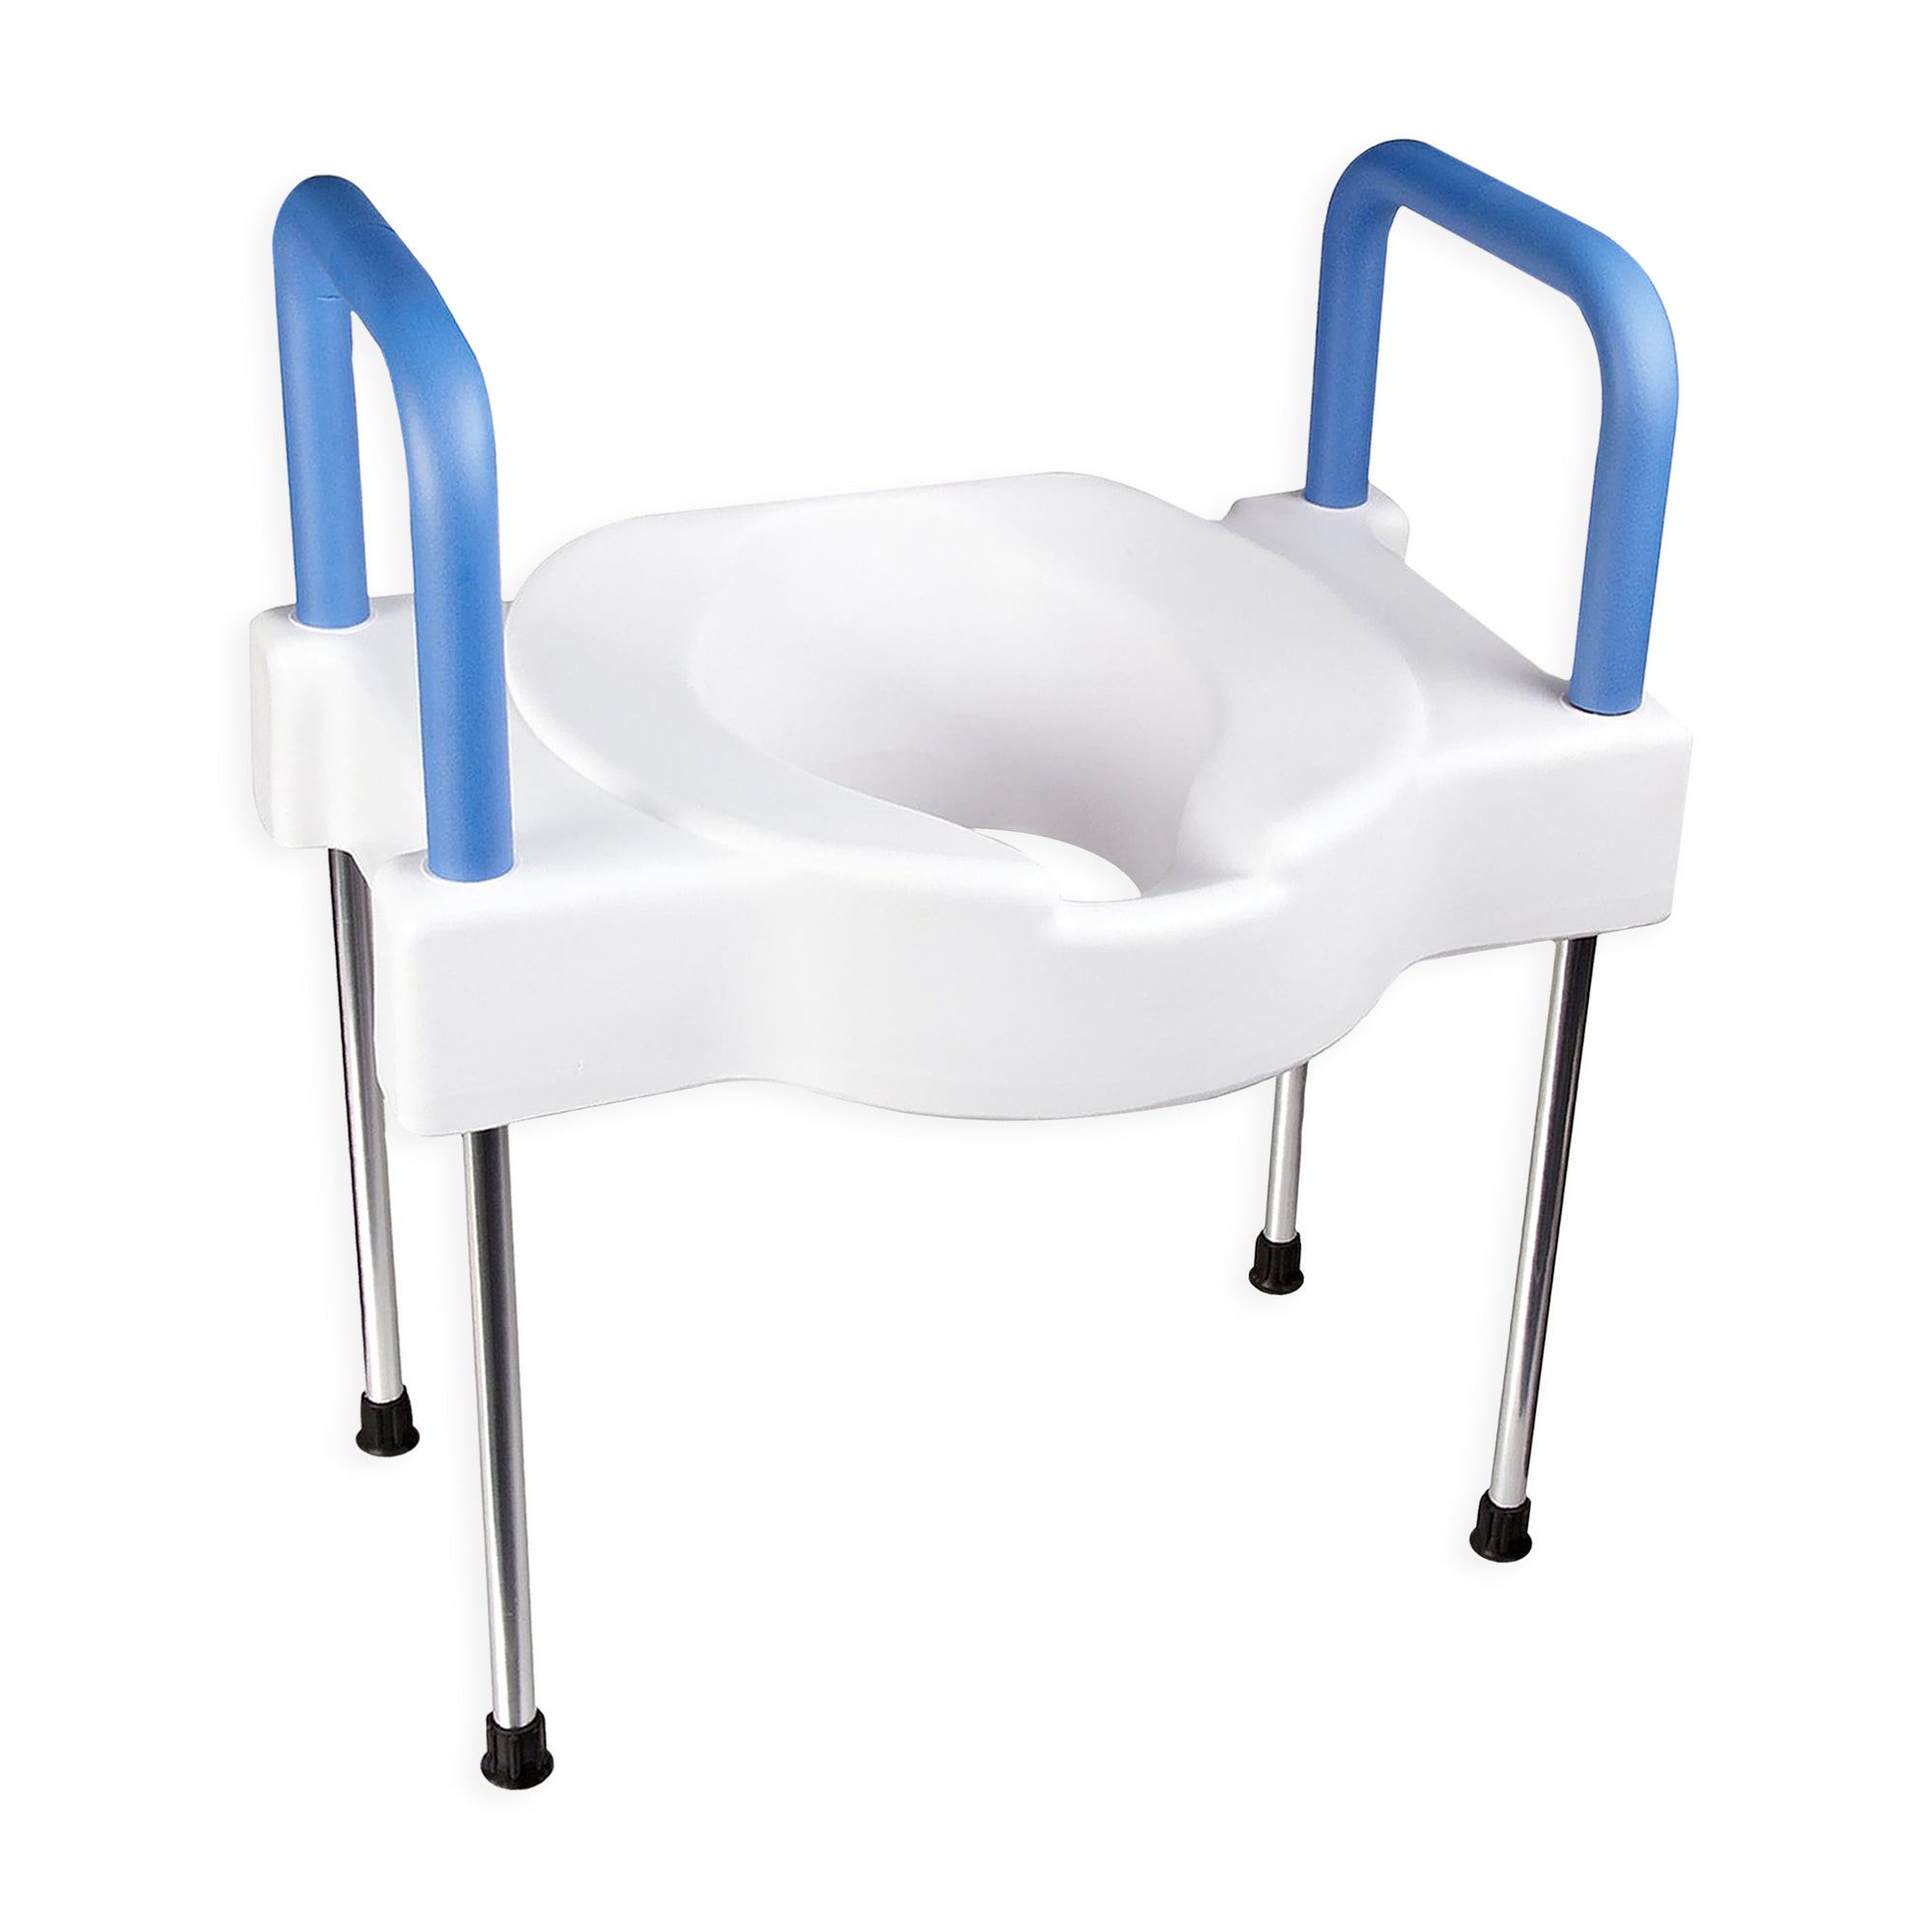 Extra Wide Tall-Ette Elevated Toilet Seat (with or without Legs)-Aluminum Legs